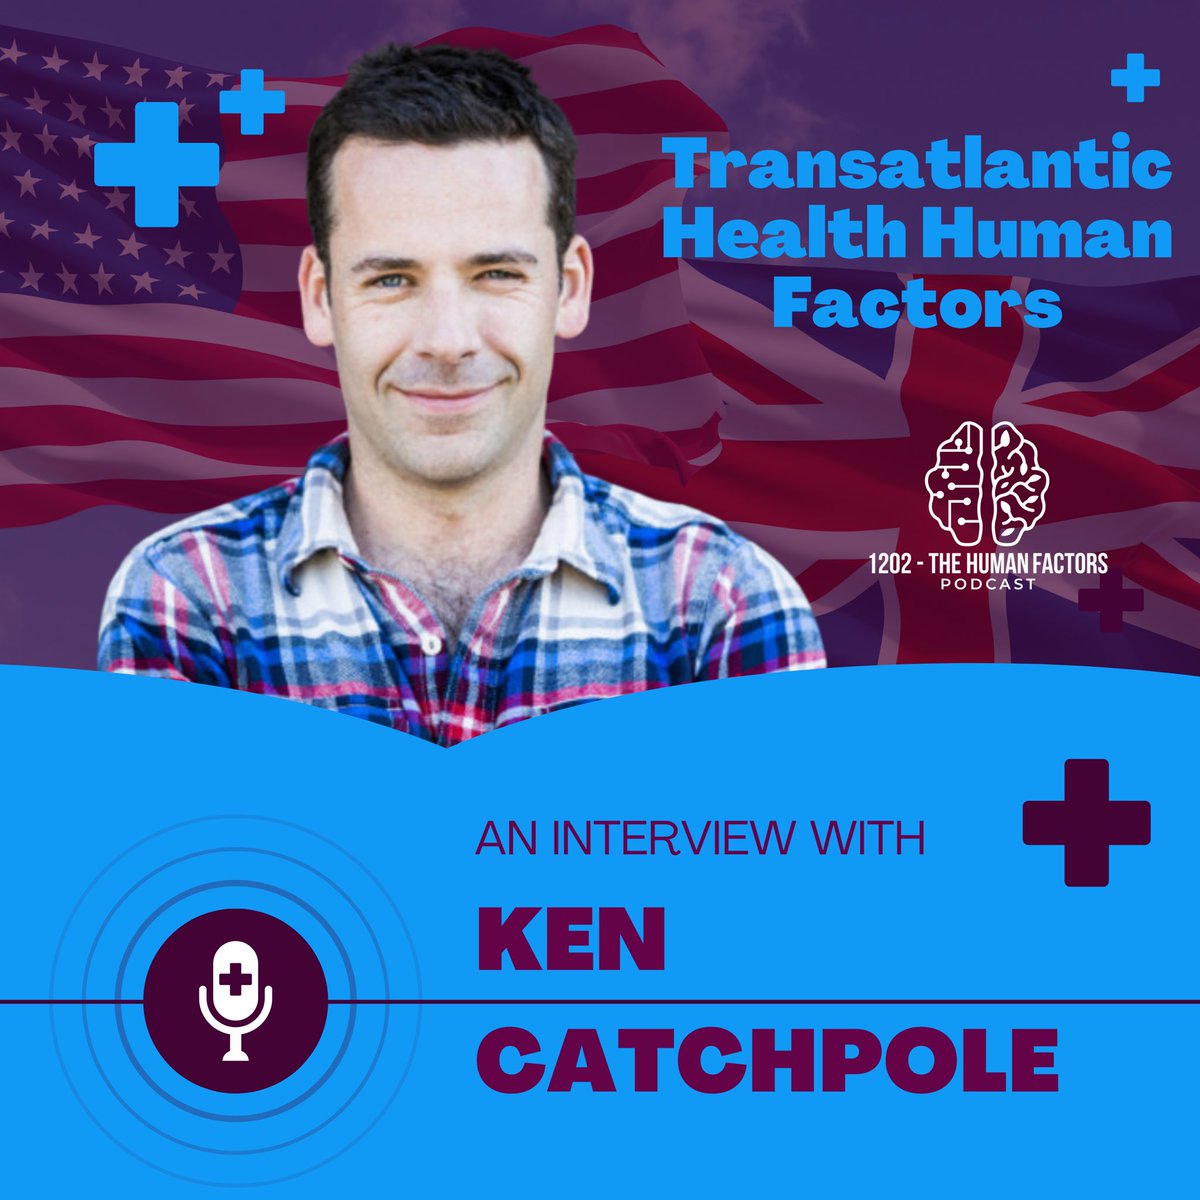 Bank Holiday Special - How do the Human Factors #Healthcare challenges differ across “The Pond” - @Baz_k talks with @KenCatchpole about #Transatlantic influences. #HF #HumanFactors youtu.be/10I4Dvqducc?si…